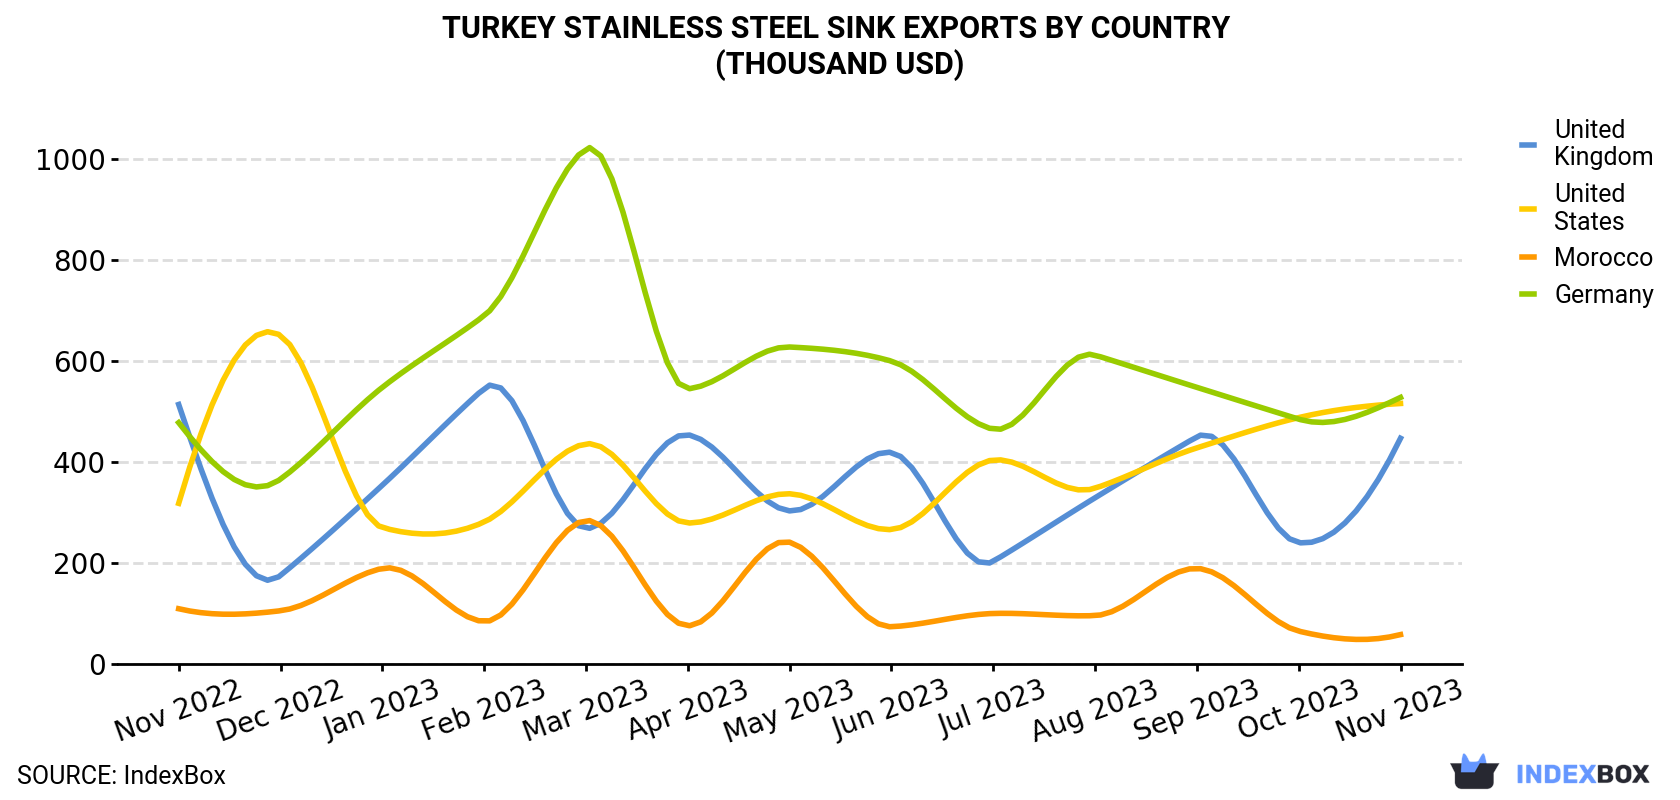 Turkey Stainless Steel Sink Exports By Country (Thousand USD)